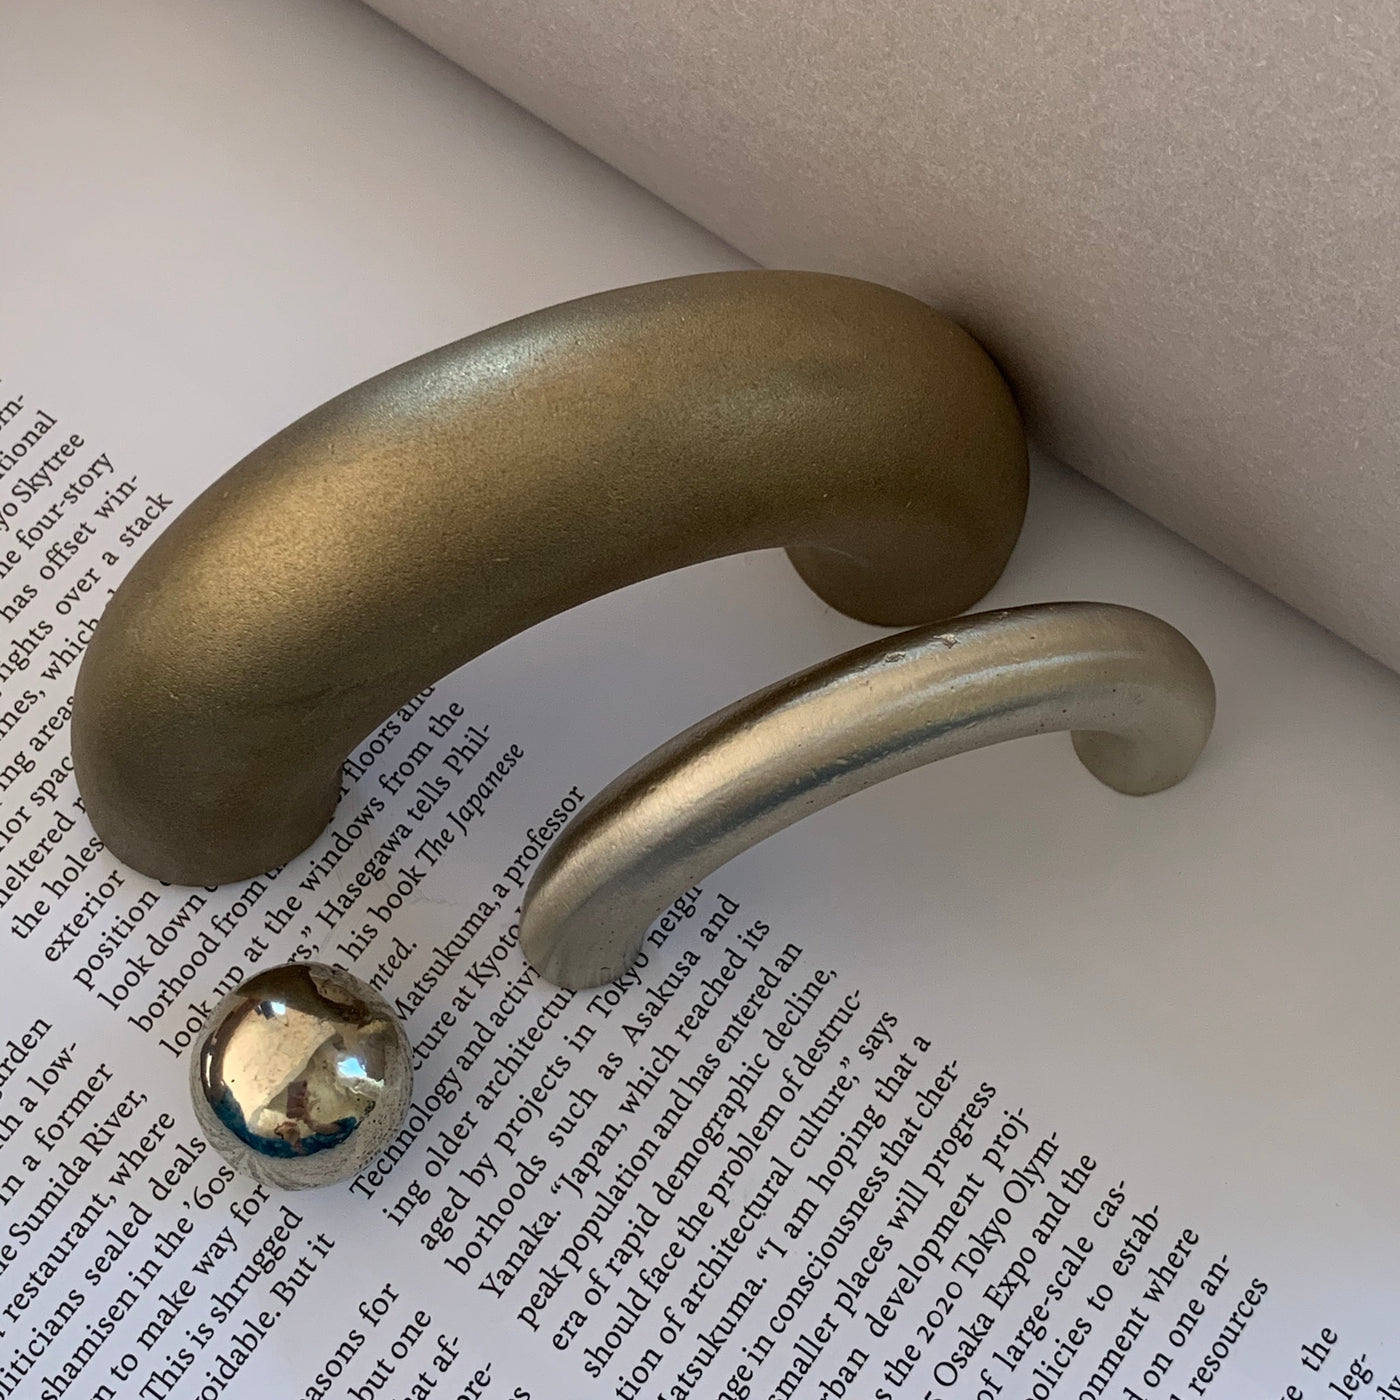 solid cast natural and white brass and bronze curved cabinet hardware handle by Maha Alavisolid cast natural and white brass and bronze curved cabinet hardware handle by Maha Alavi